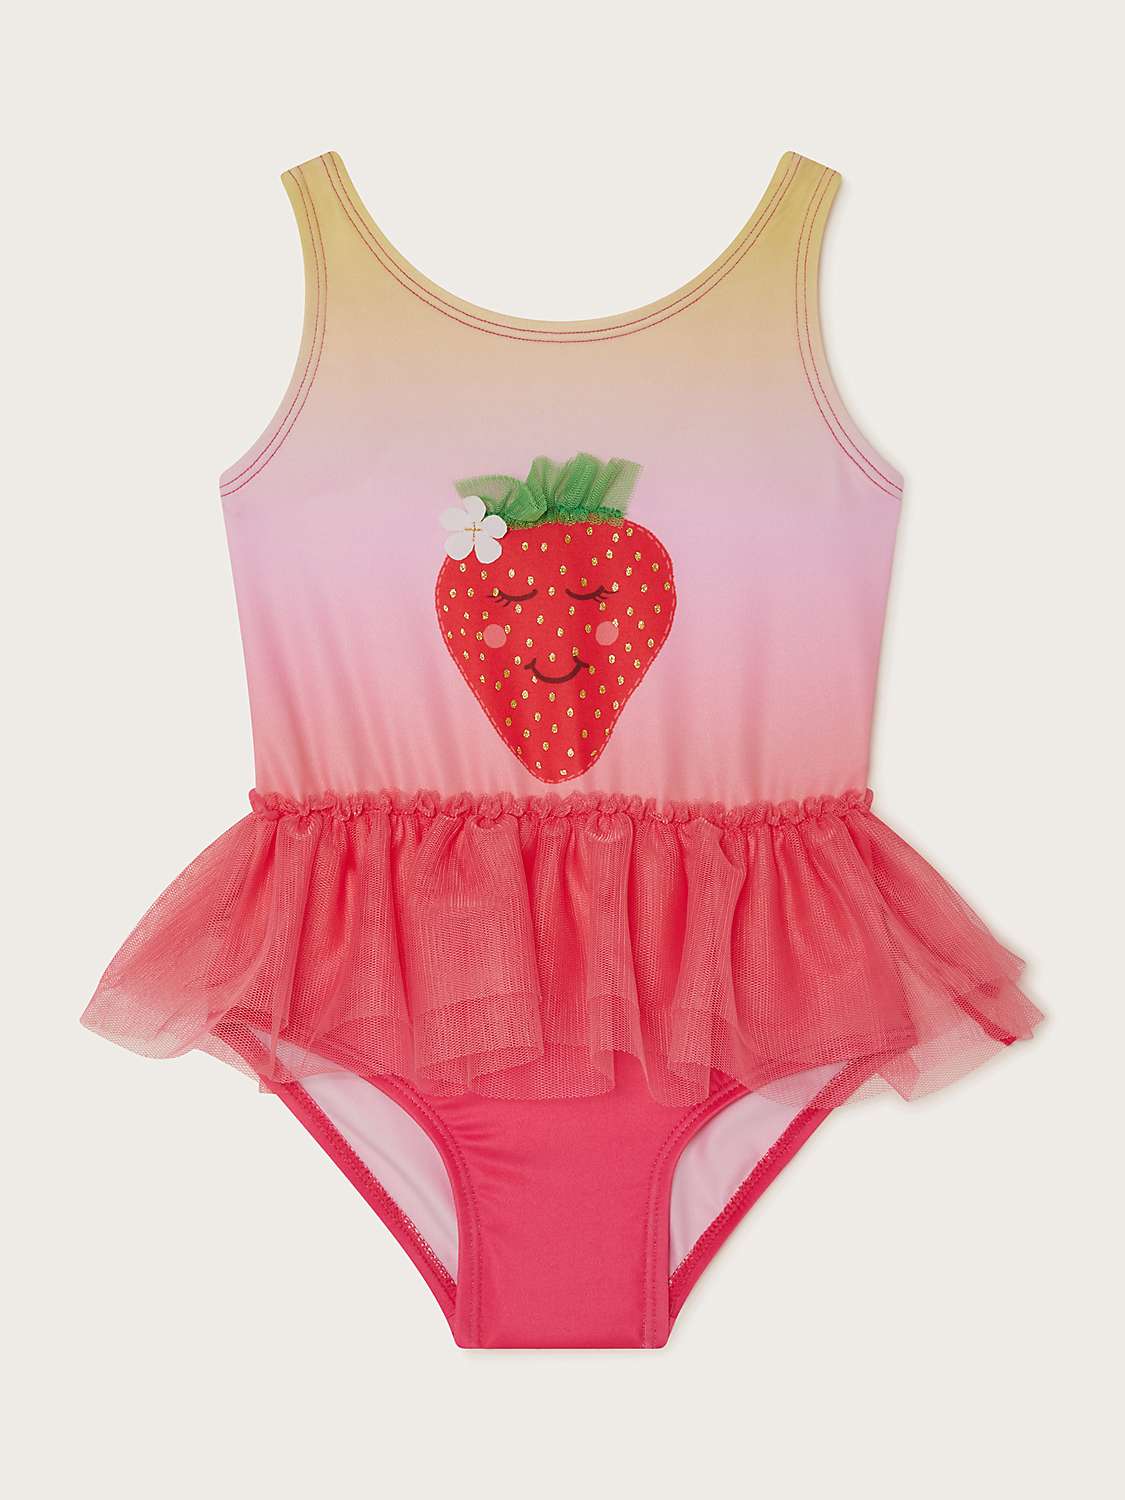 Buy Monsoon Baby Strawberry Motif Mesh Frill Swimsuit, Pale Pink/Multi Online at johnlewis.com